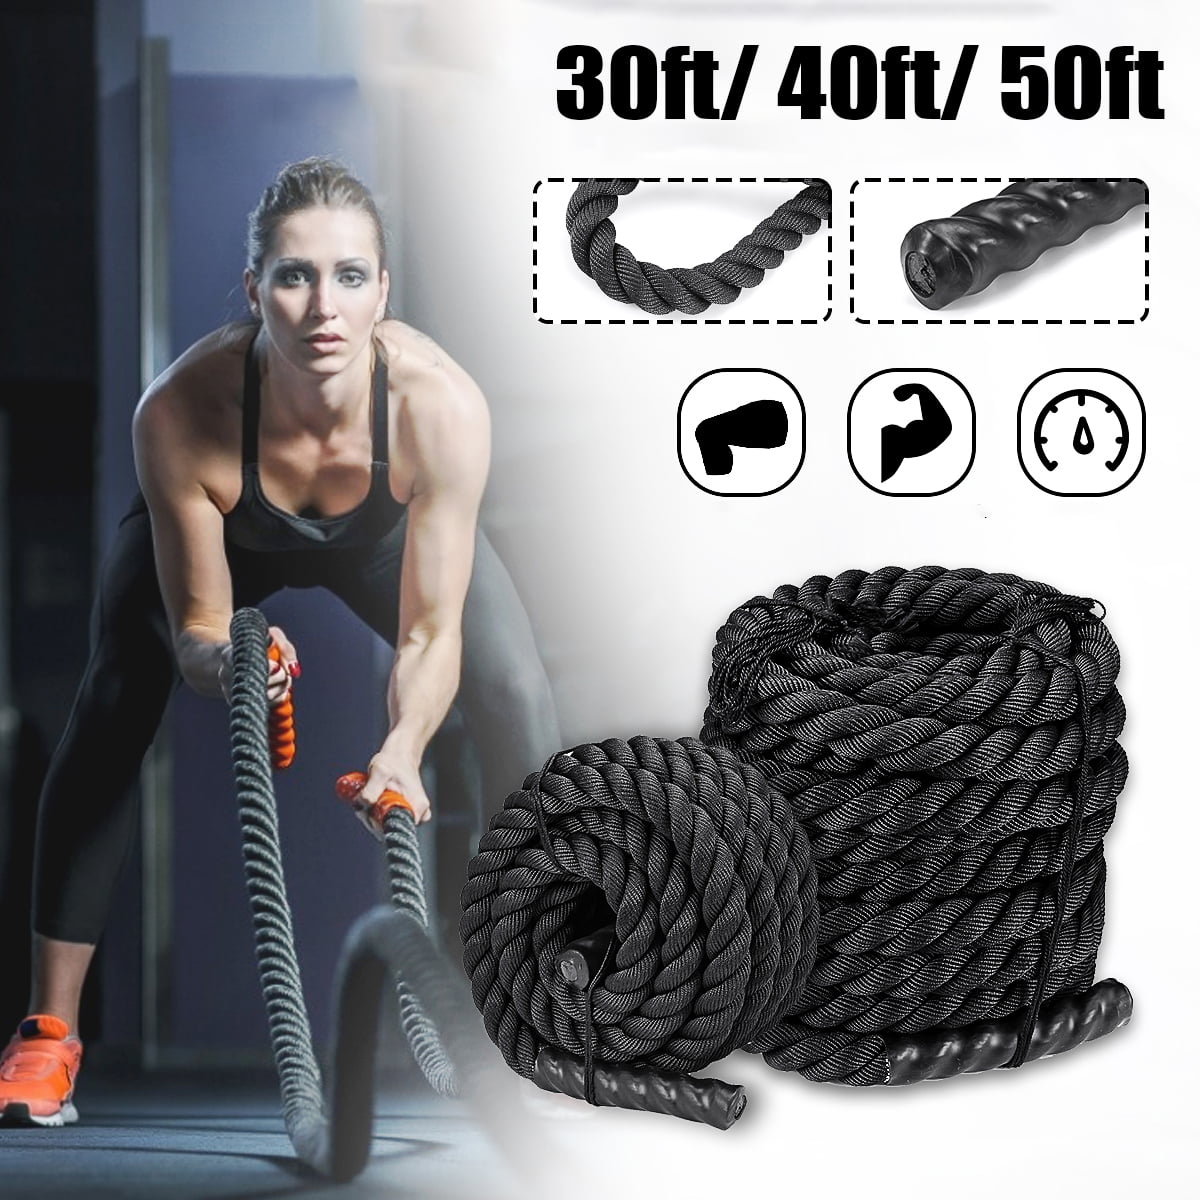 Training Battle Rope 40ft 1.5in Gym Fitness CrossFit Power Strength Jump Ropes 